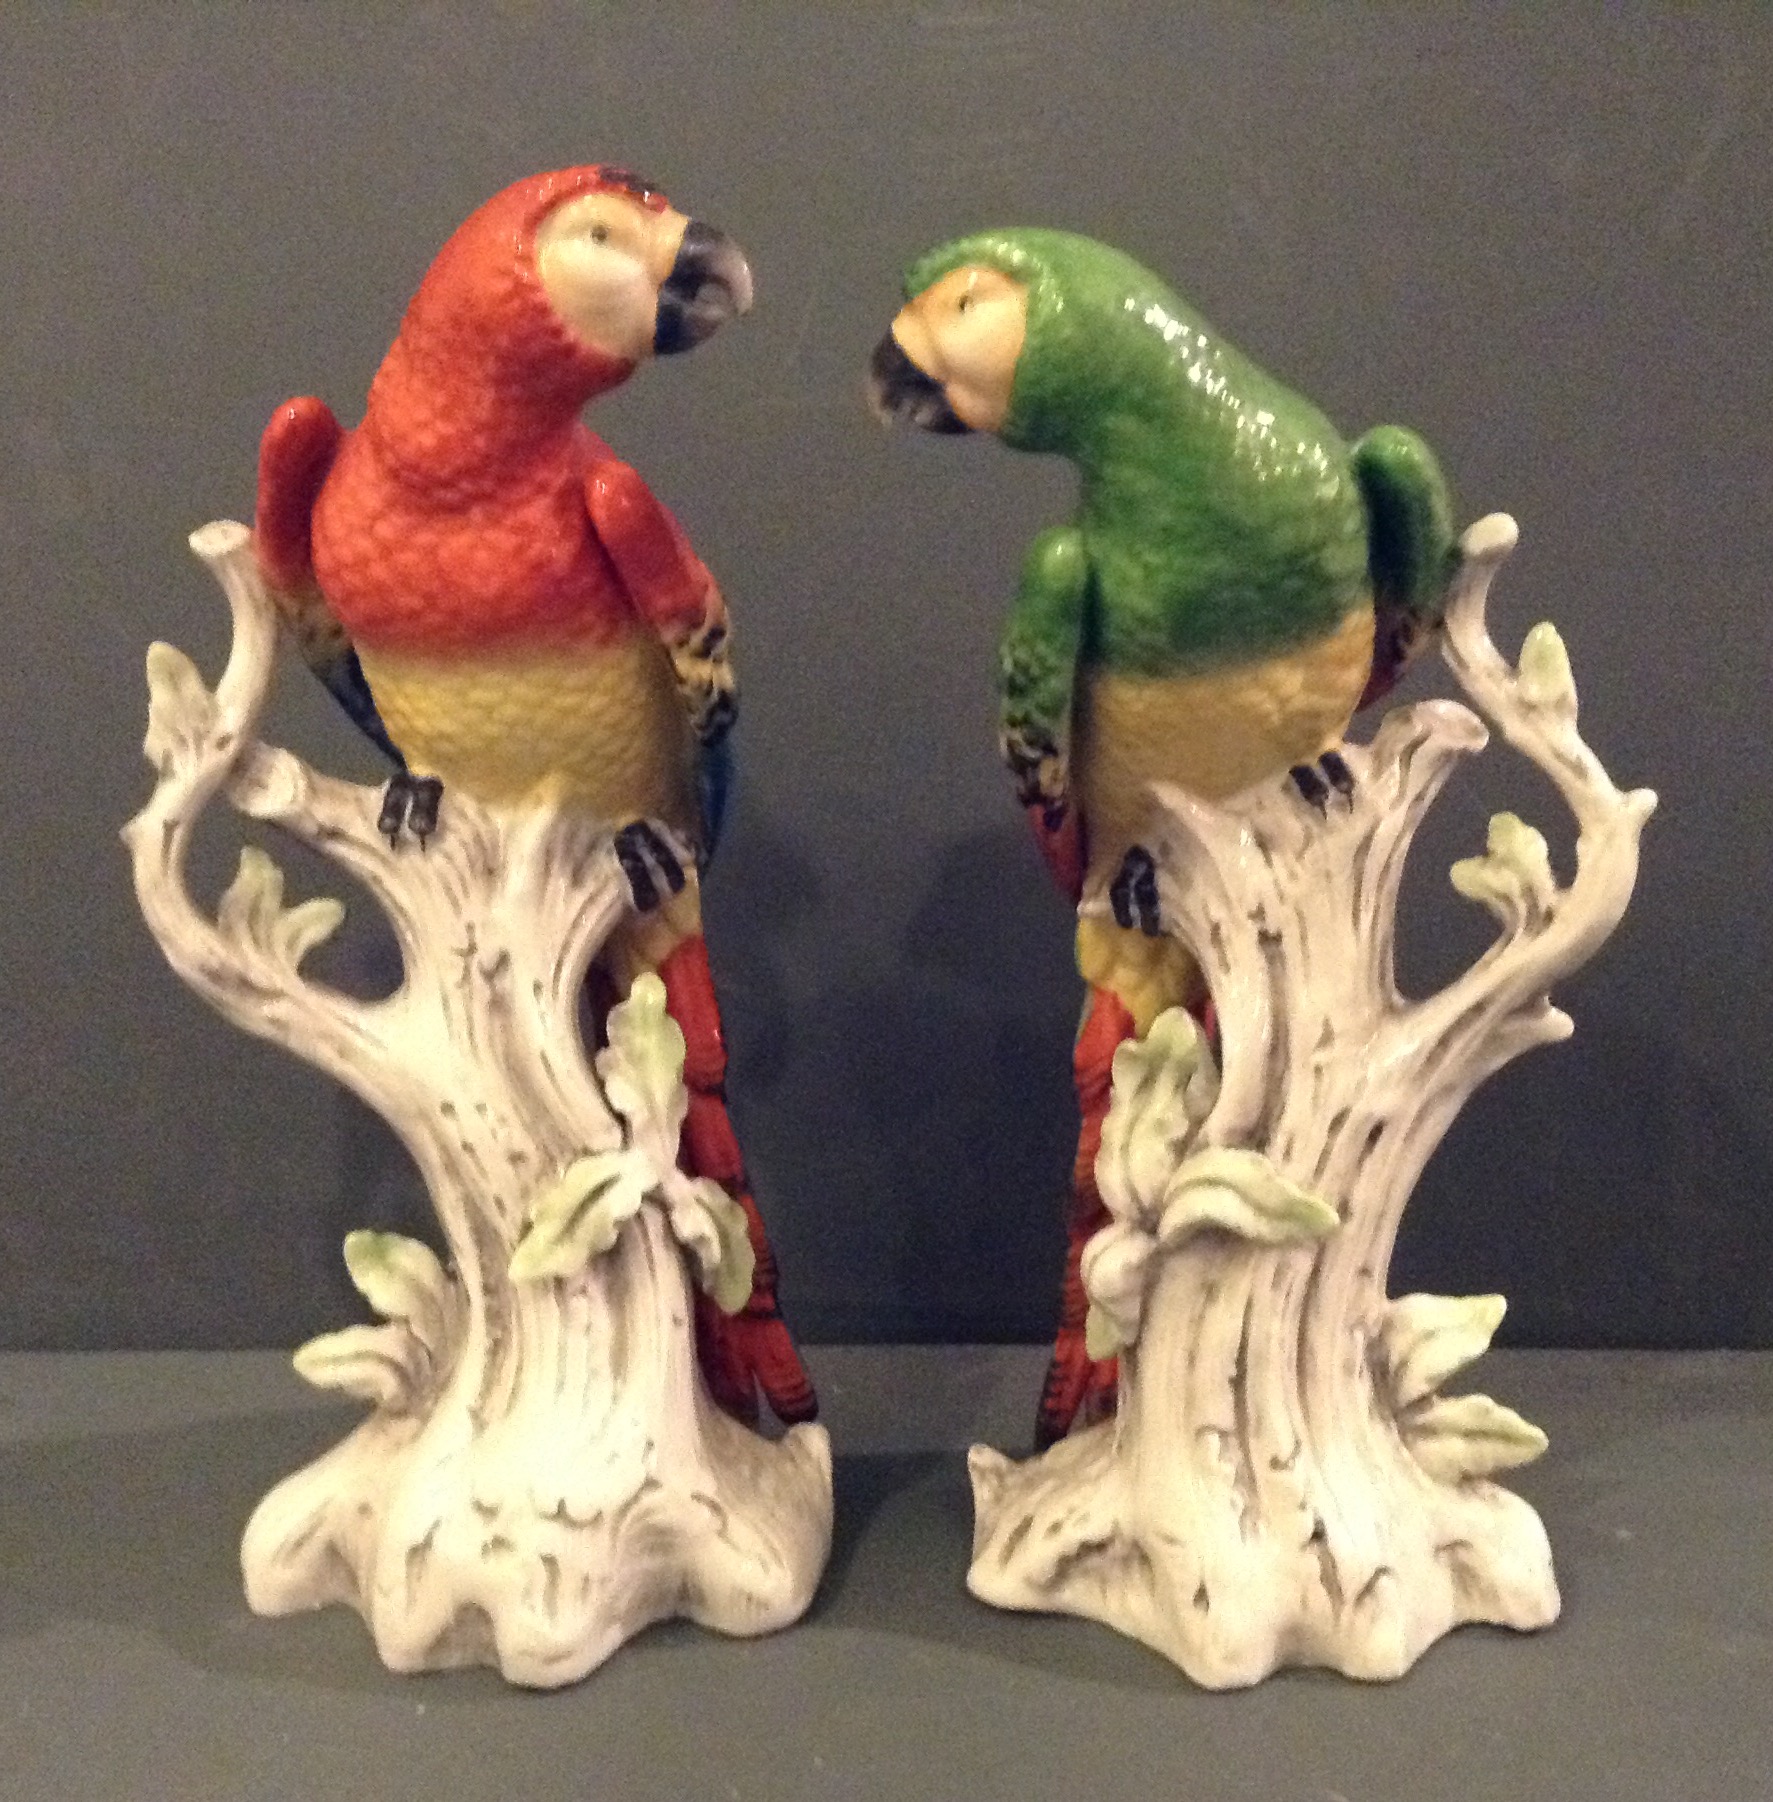 A PAIR OF 19TH CENTURY CONTINENTAL PORCELAIN FIGURES Modelled as parrots perched on a gnarled